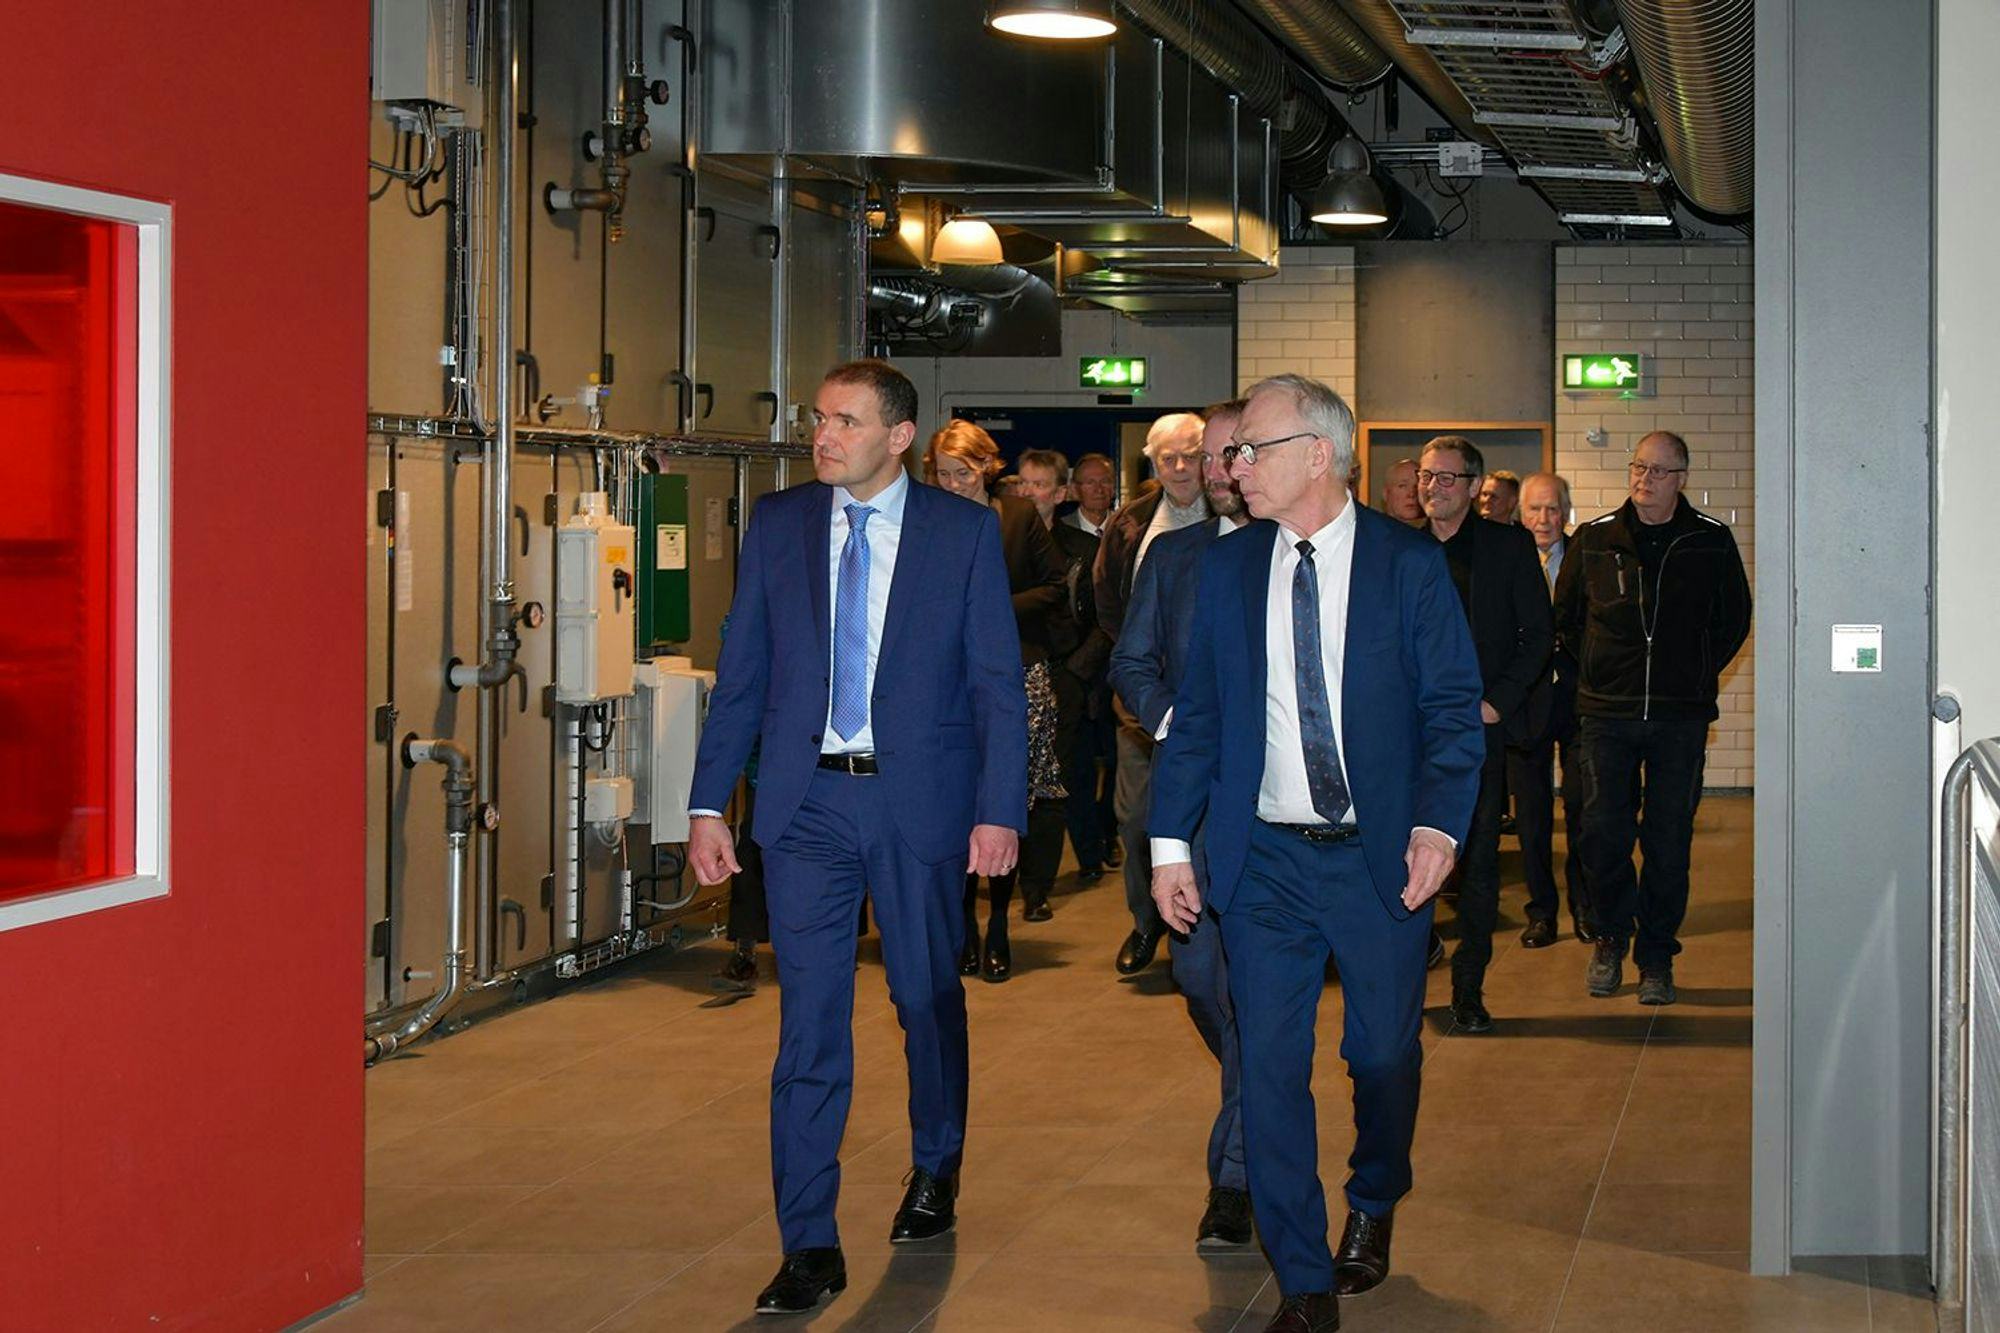 Two men walking through an industrial setting with more people following behind them